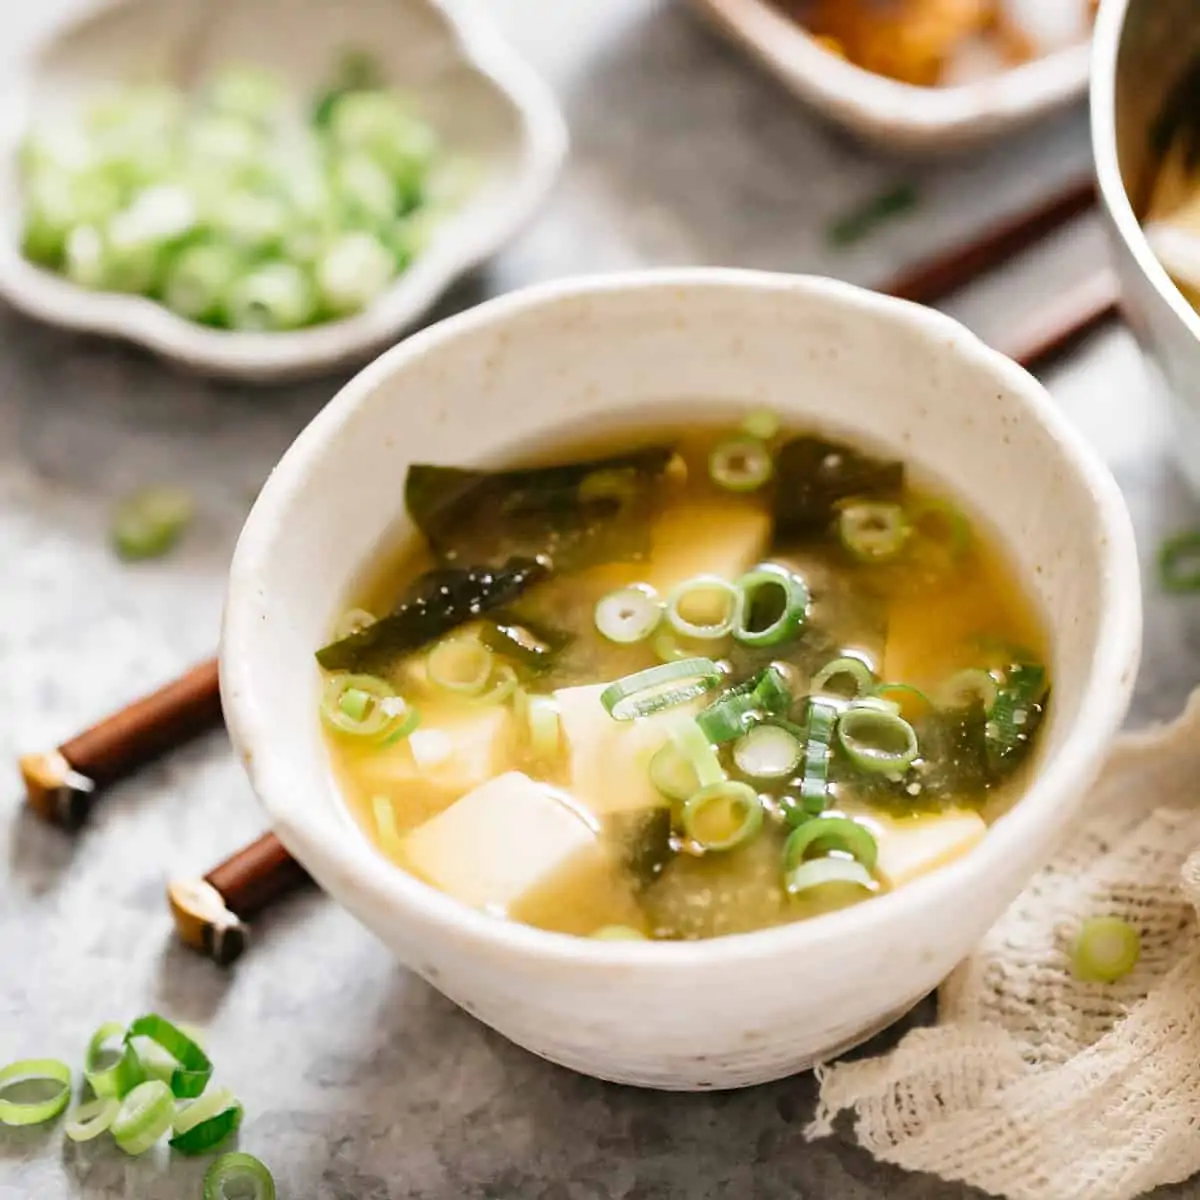 Tofu and wakame miso soup served in a bowl